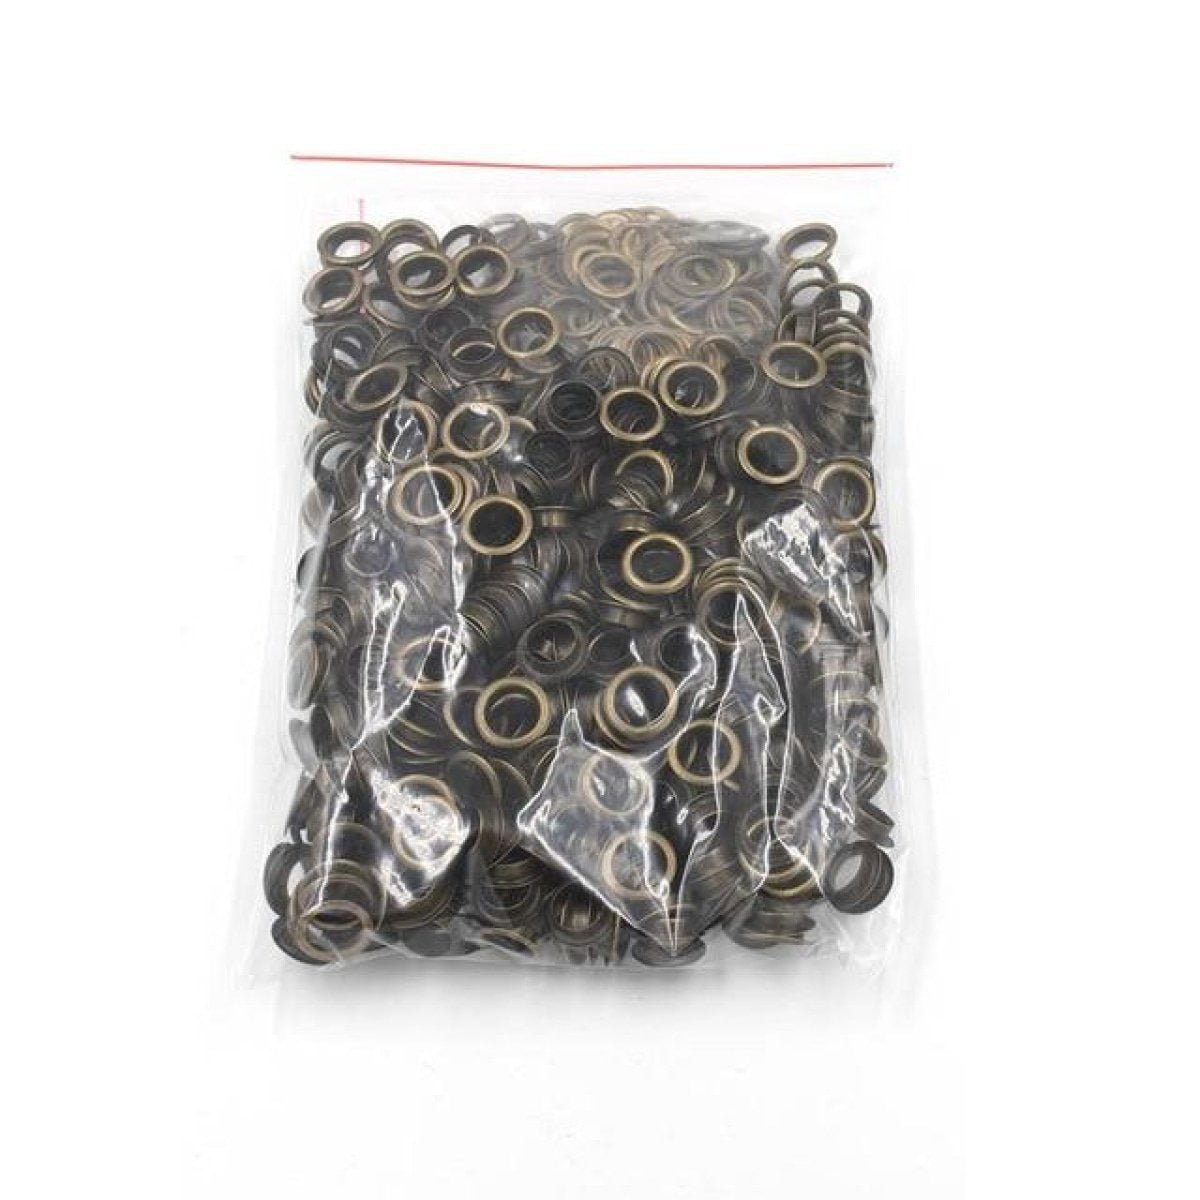 100pcs 2mm 3mm 3.5mm 4mm 4.5mm 5mm 6mm 8mm Eyelets Rivets Metal Buttonholes Buckle Clothing Buttons Bronze Chrome Gold Silver Grey Gun Metal Craft - 1.5mm Bronze - - Asia Sell